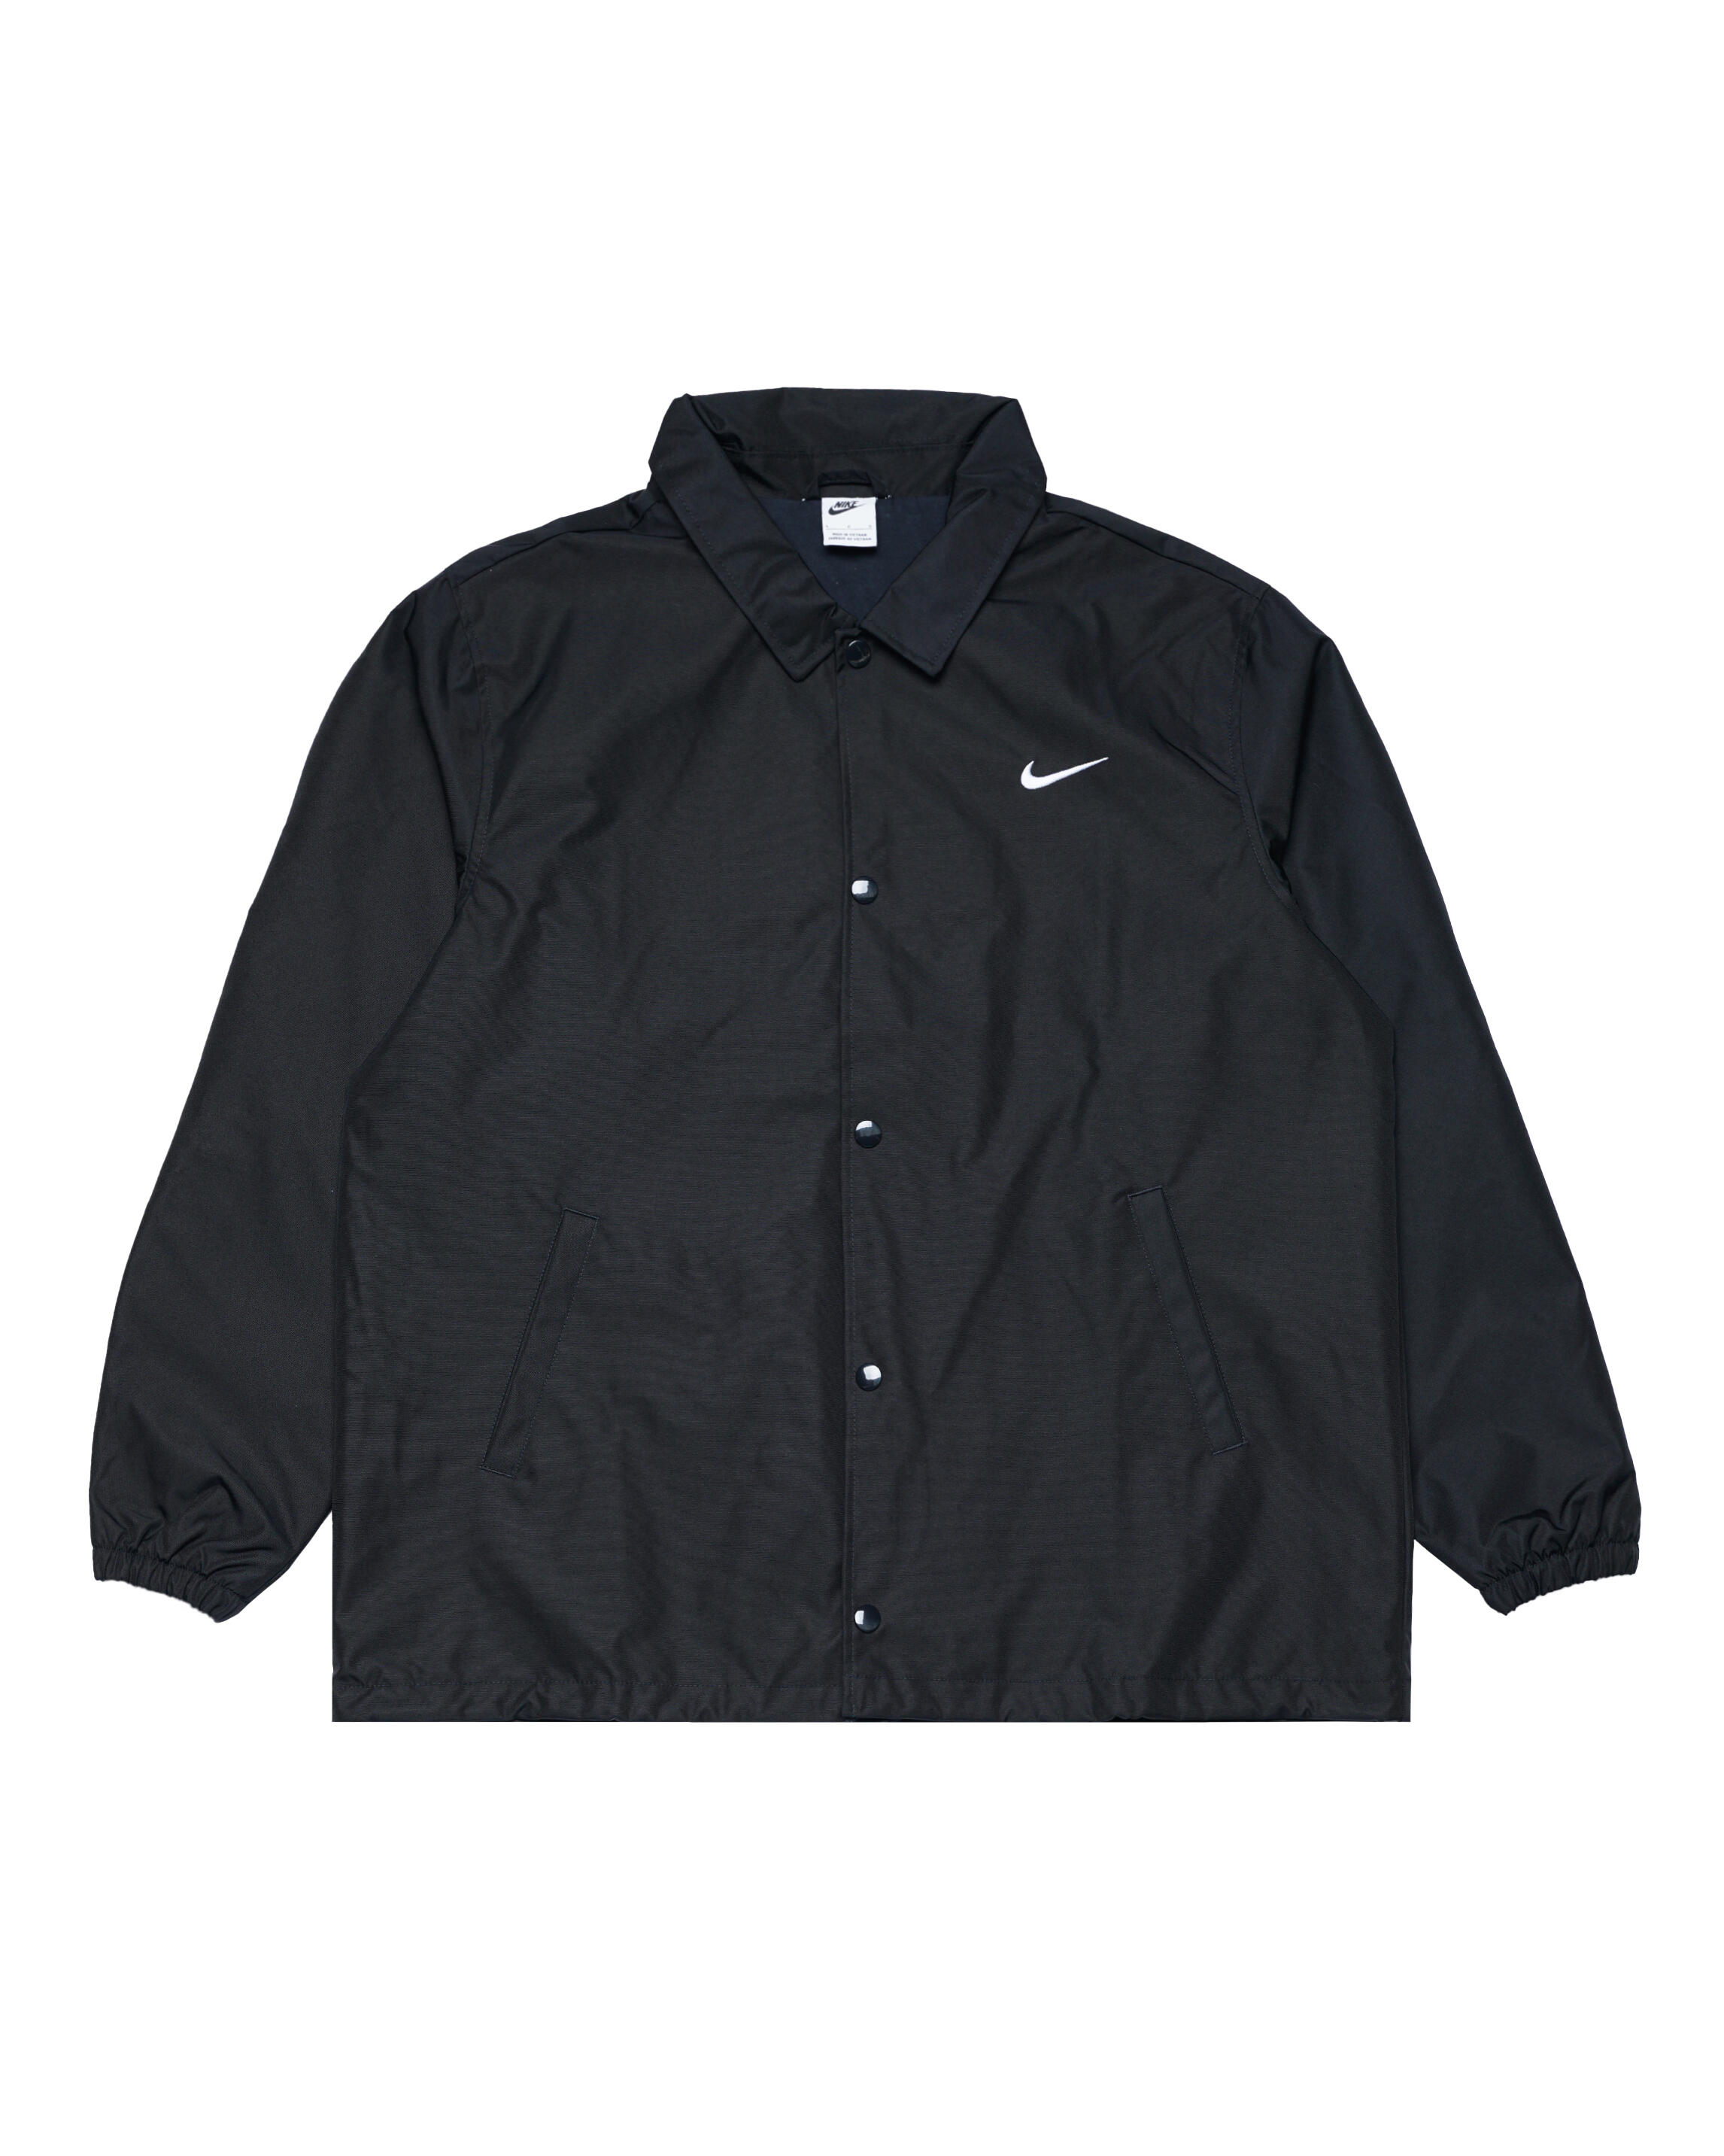 Nike AUTHENTICS LINED COACHES JACKET | FD7843-010 | AFEW STORE